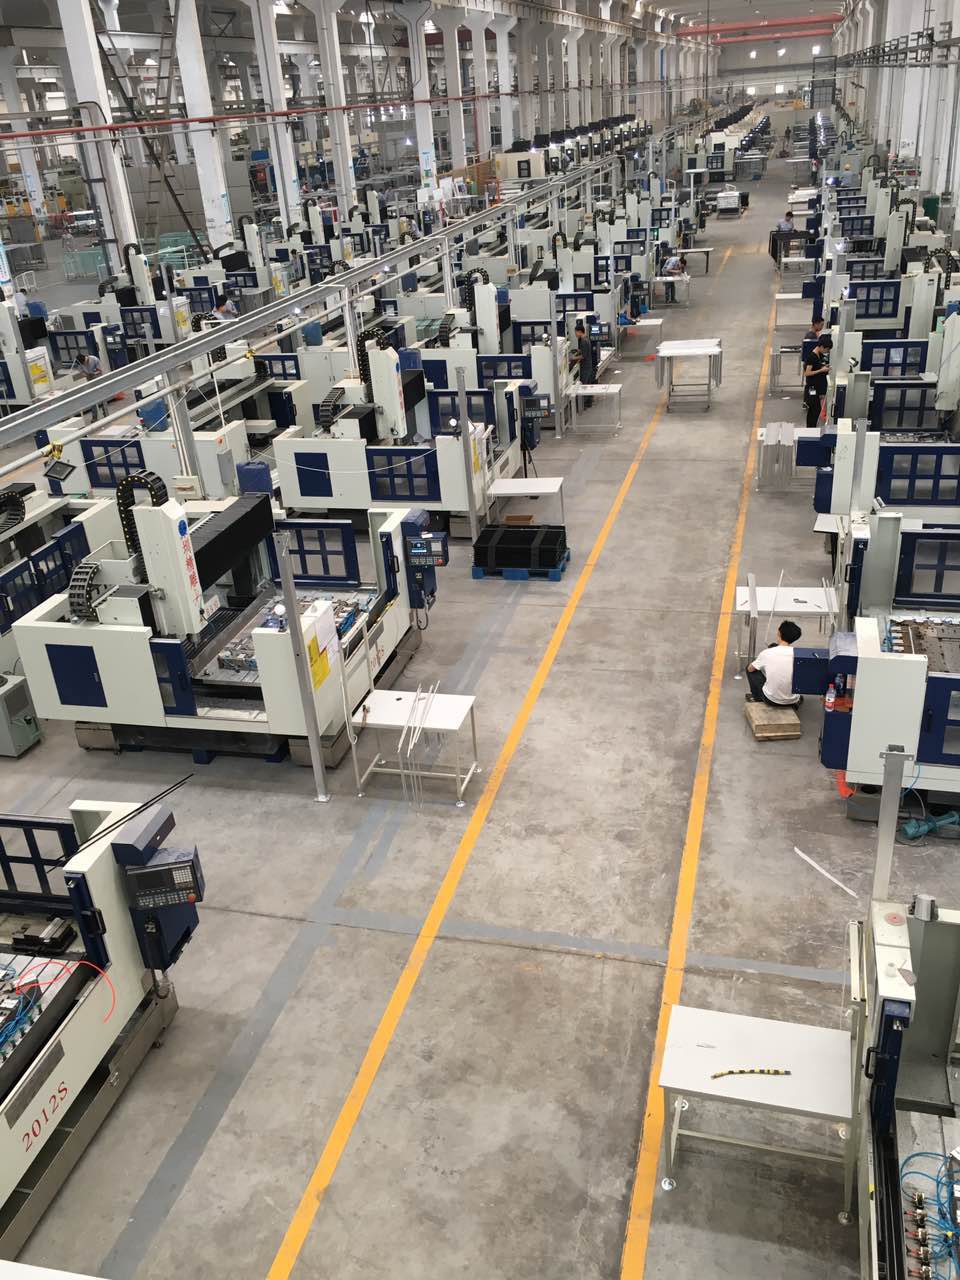 Shenzhen precision carving machine manufacturer's large-scale processing industry chain